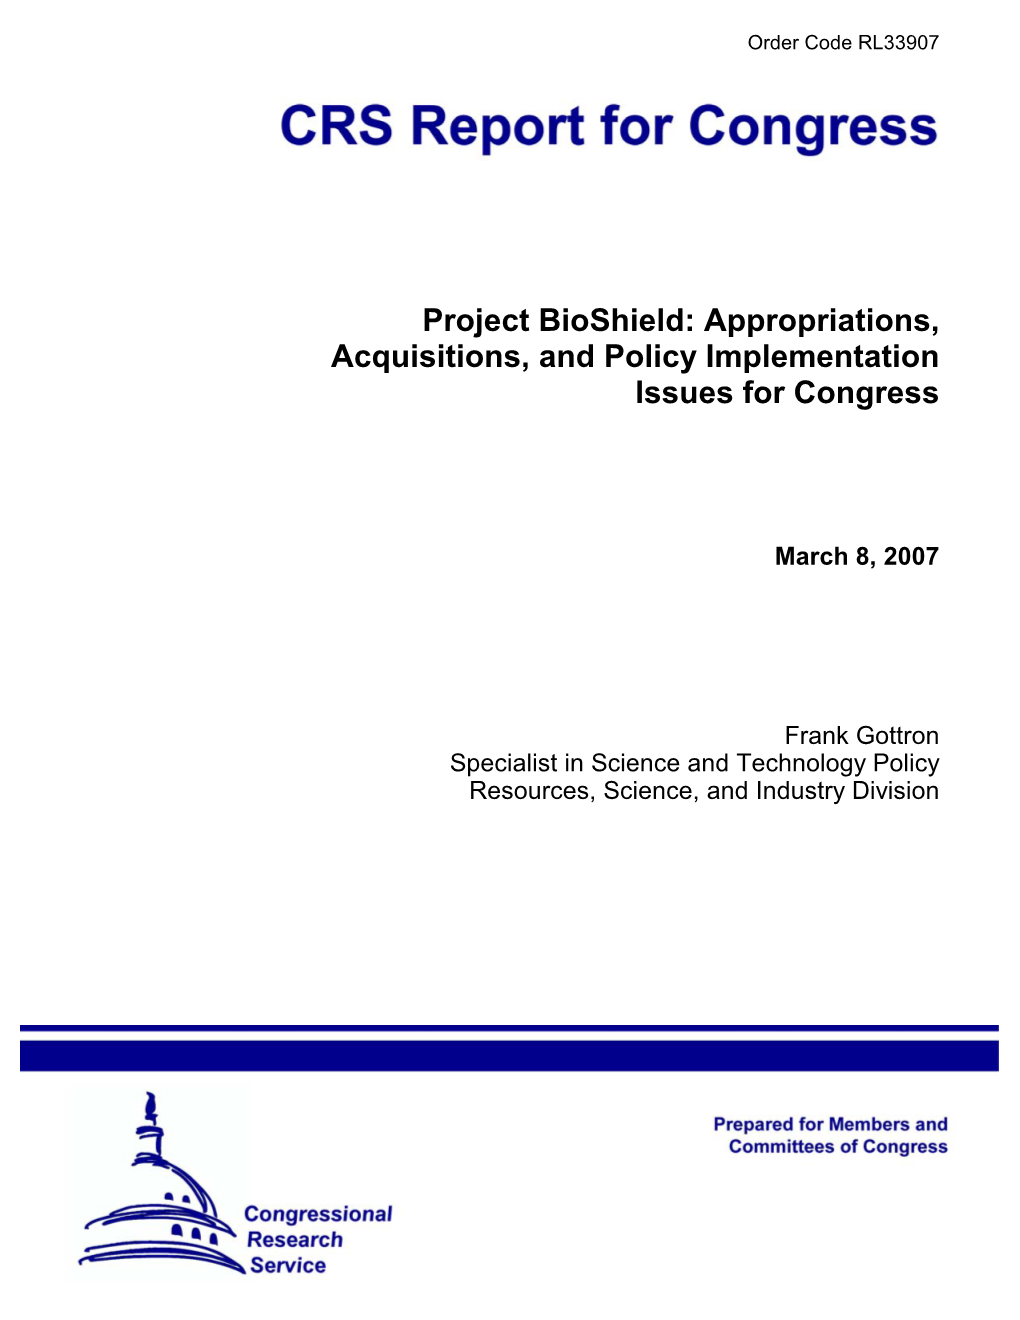 Acquisitions, and Policy Implementation Issues for Congress